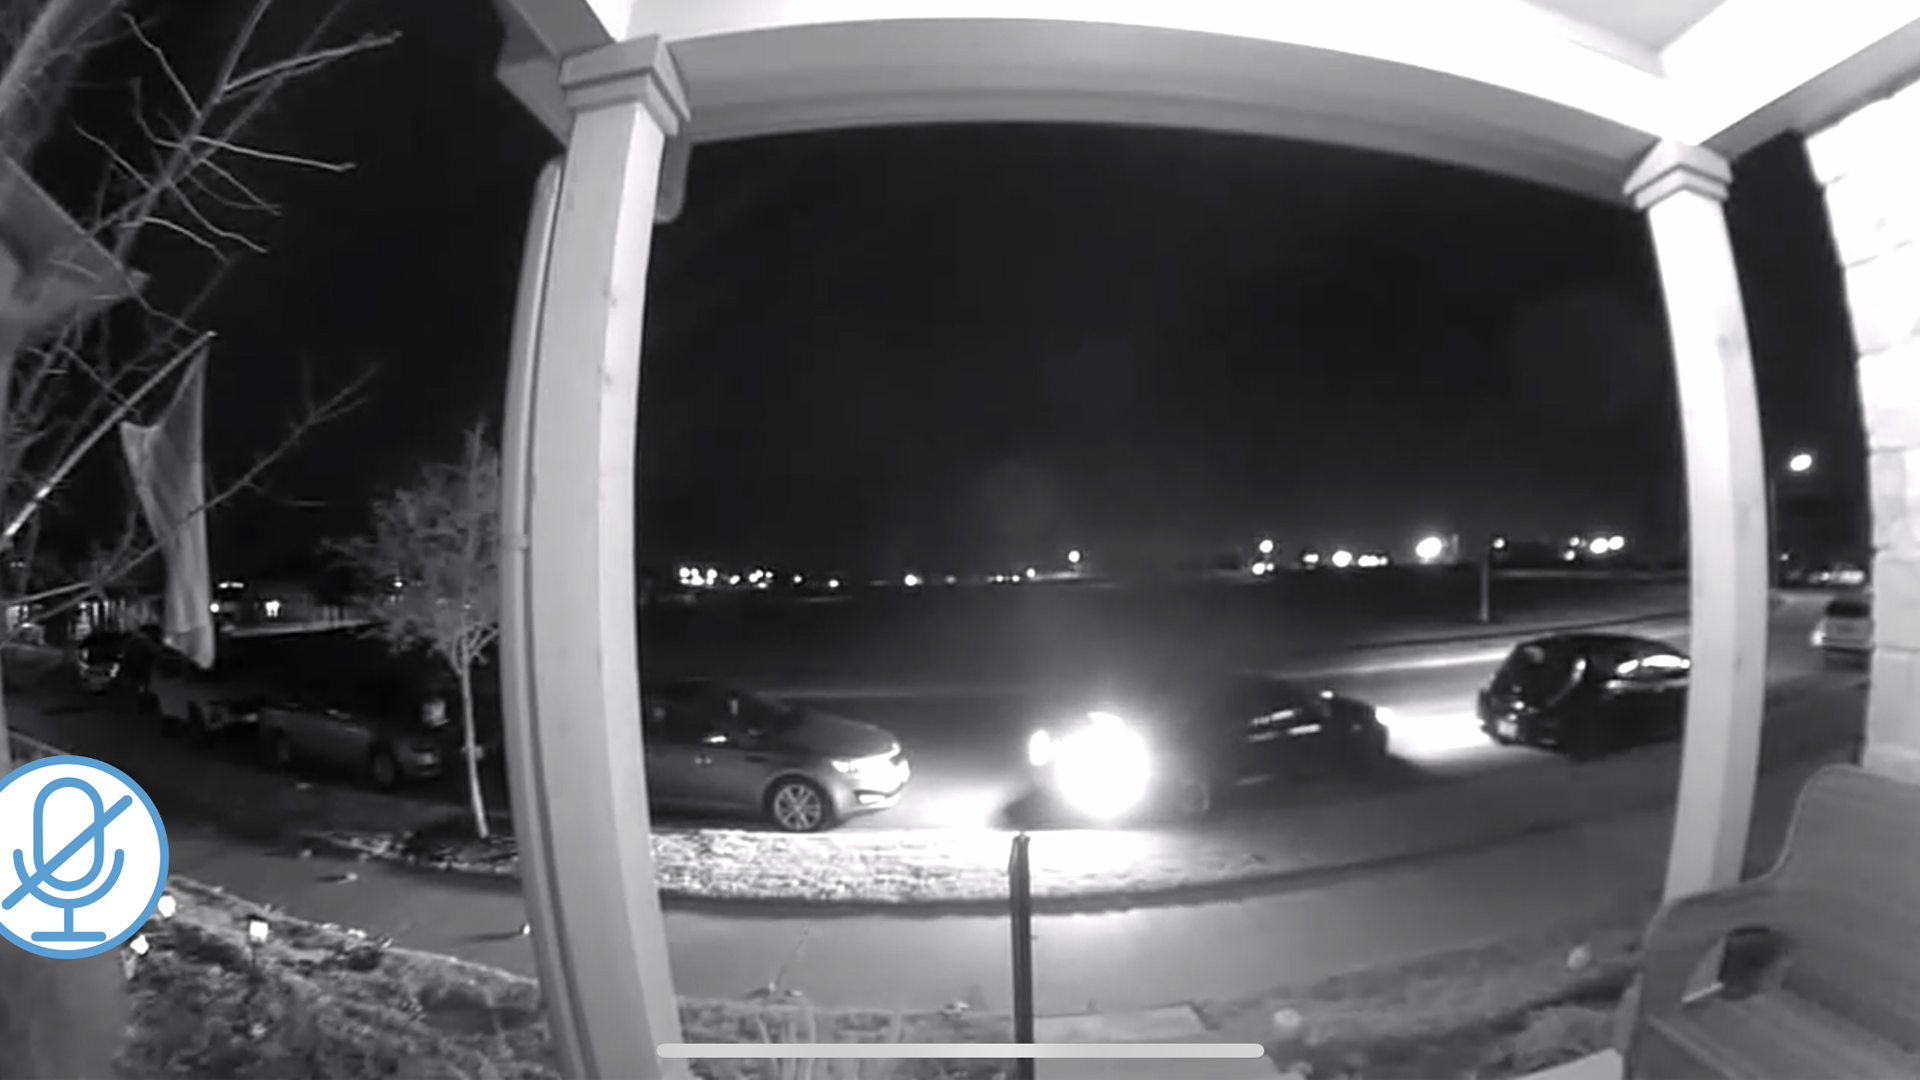 Watching cars in the Blink Video Doorbell's night vision mode